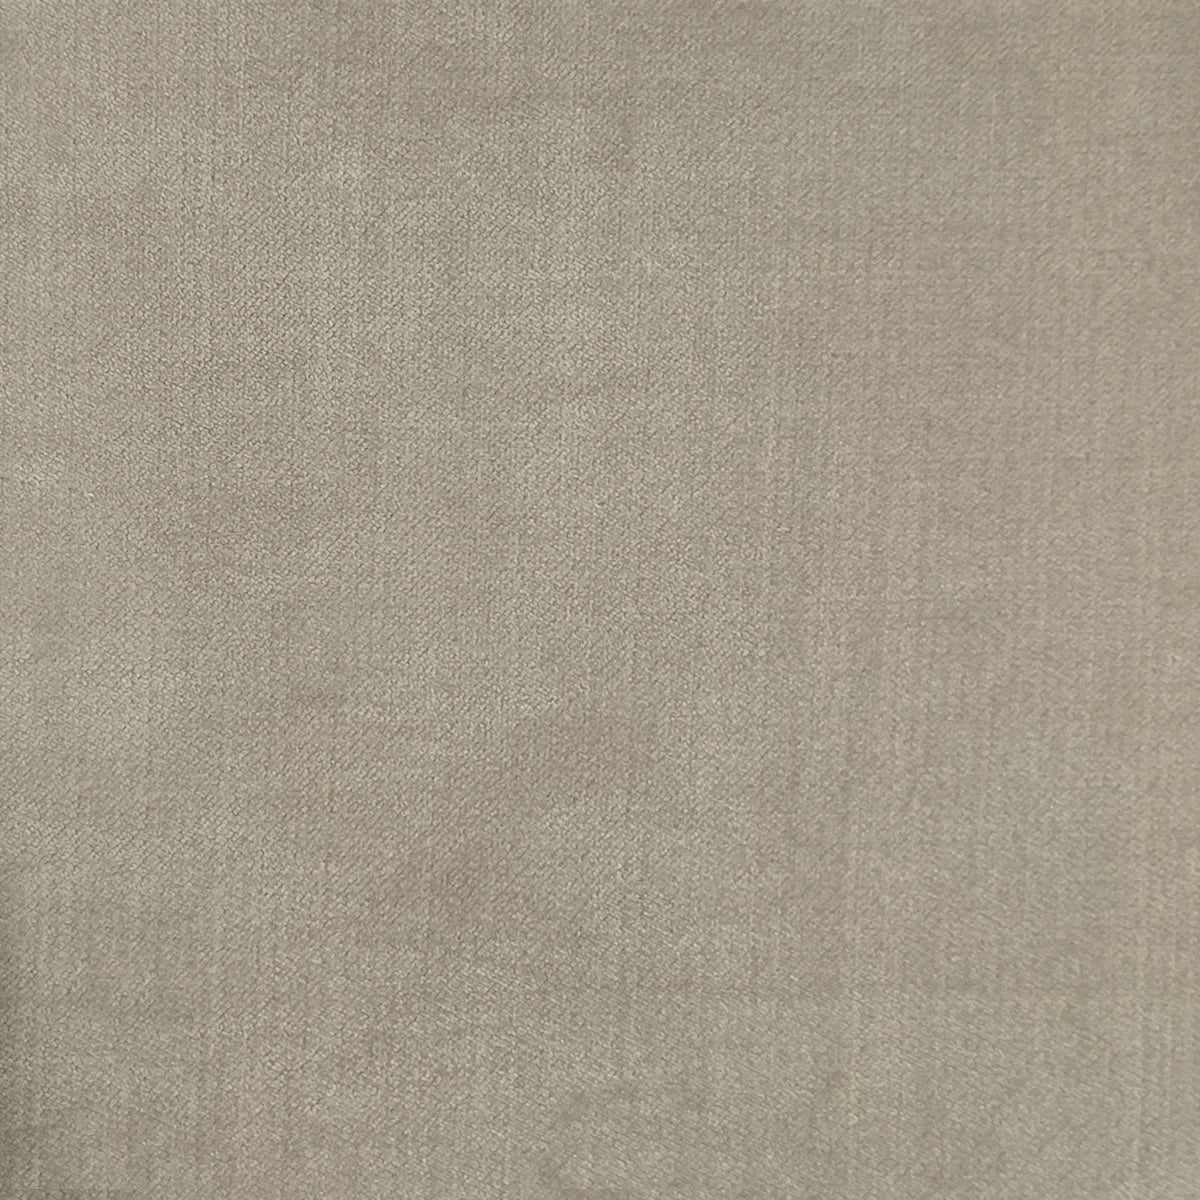 Performance Quality Velvet Upholstery Fabric Erlton Pale Taupe